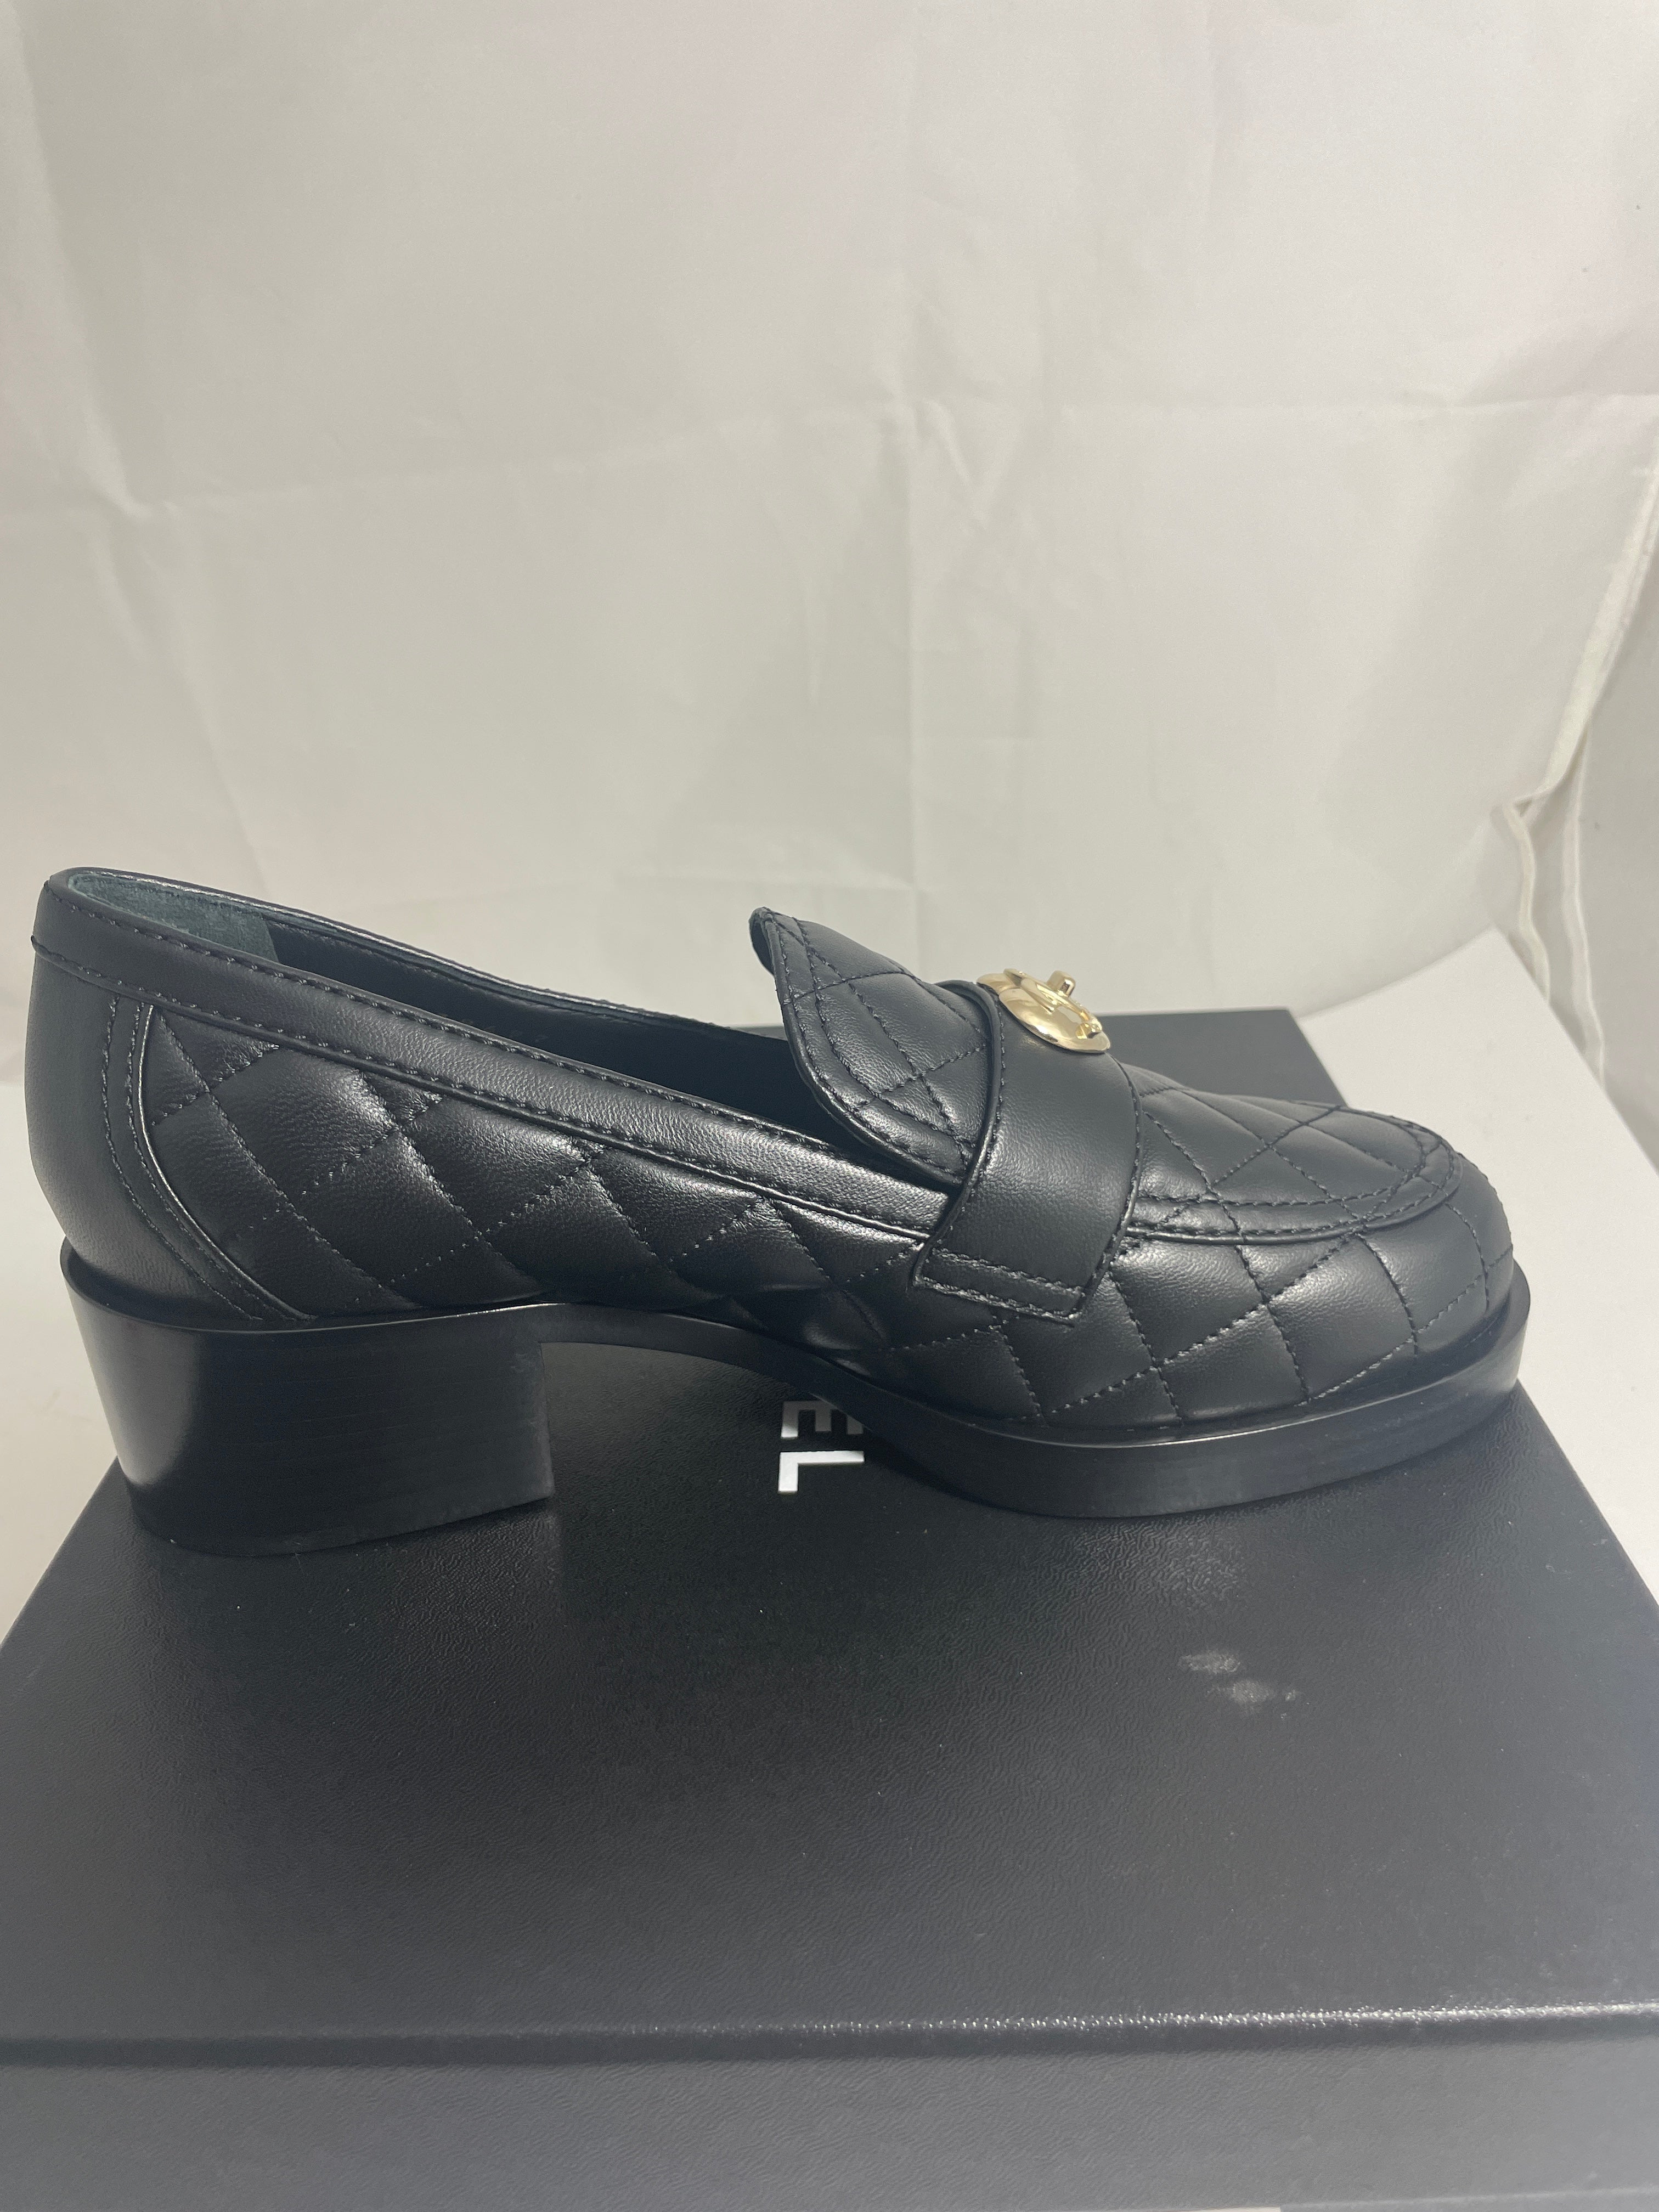 Chanel Heart CC 50mm Loafers Black Patent Calfskin - G39697 X56828 94305 -  US